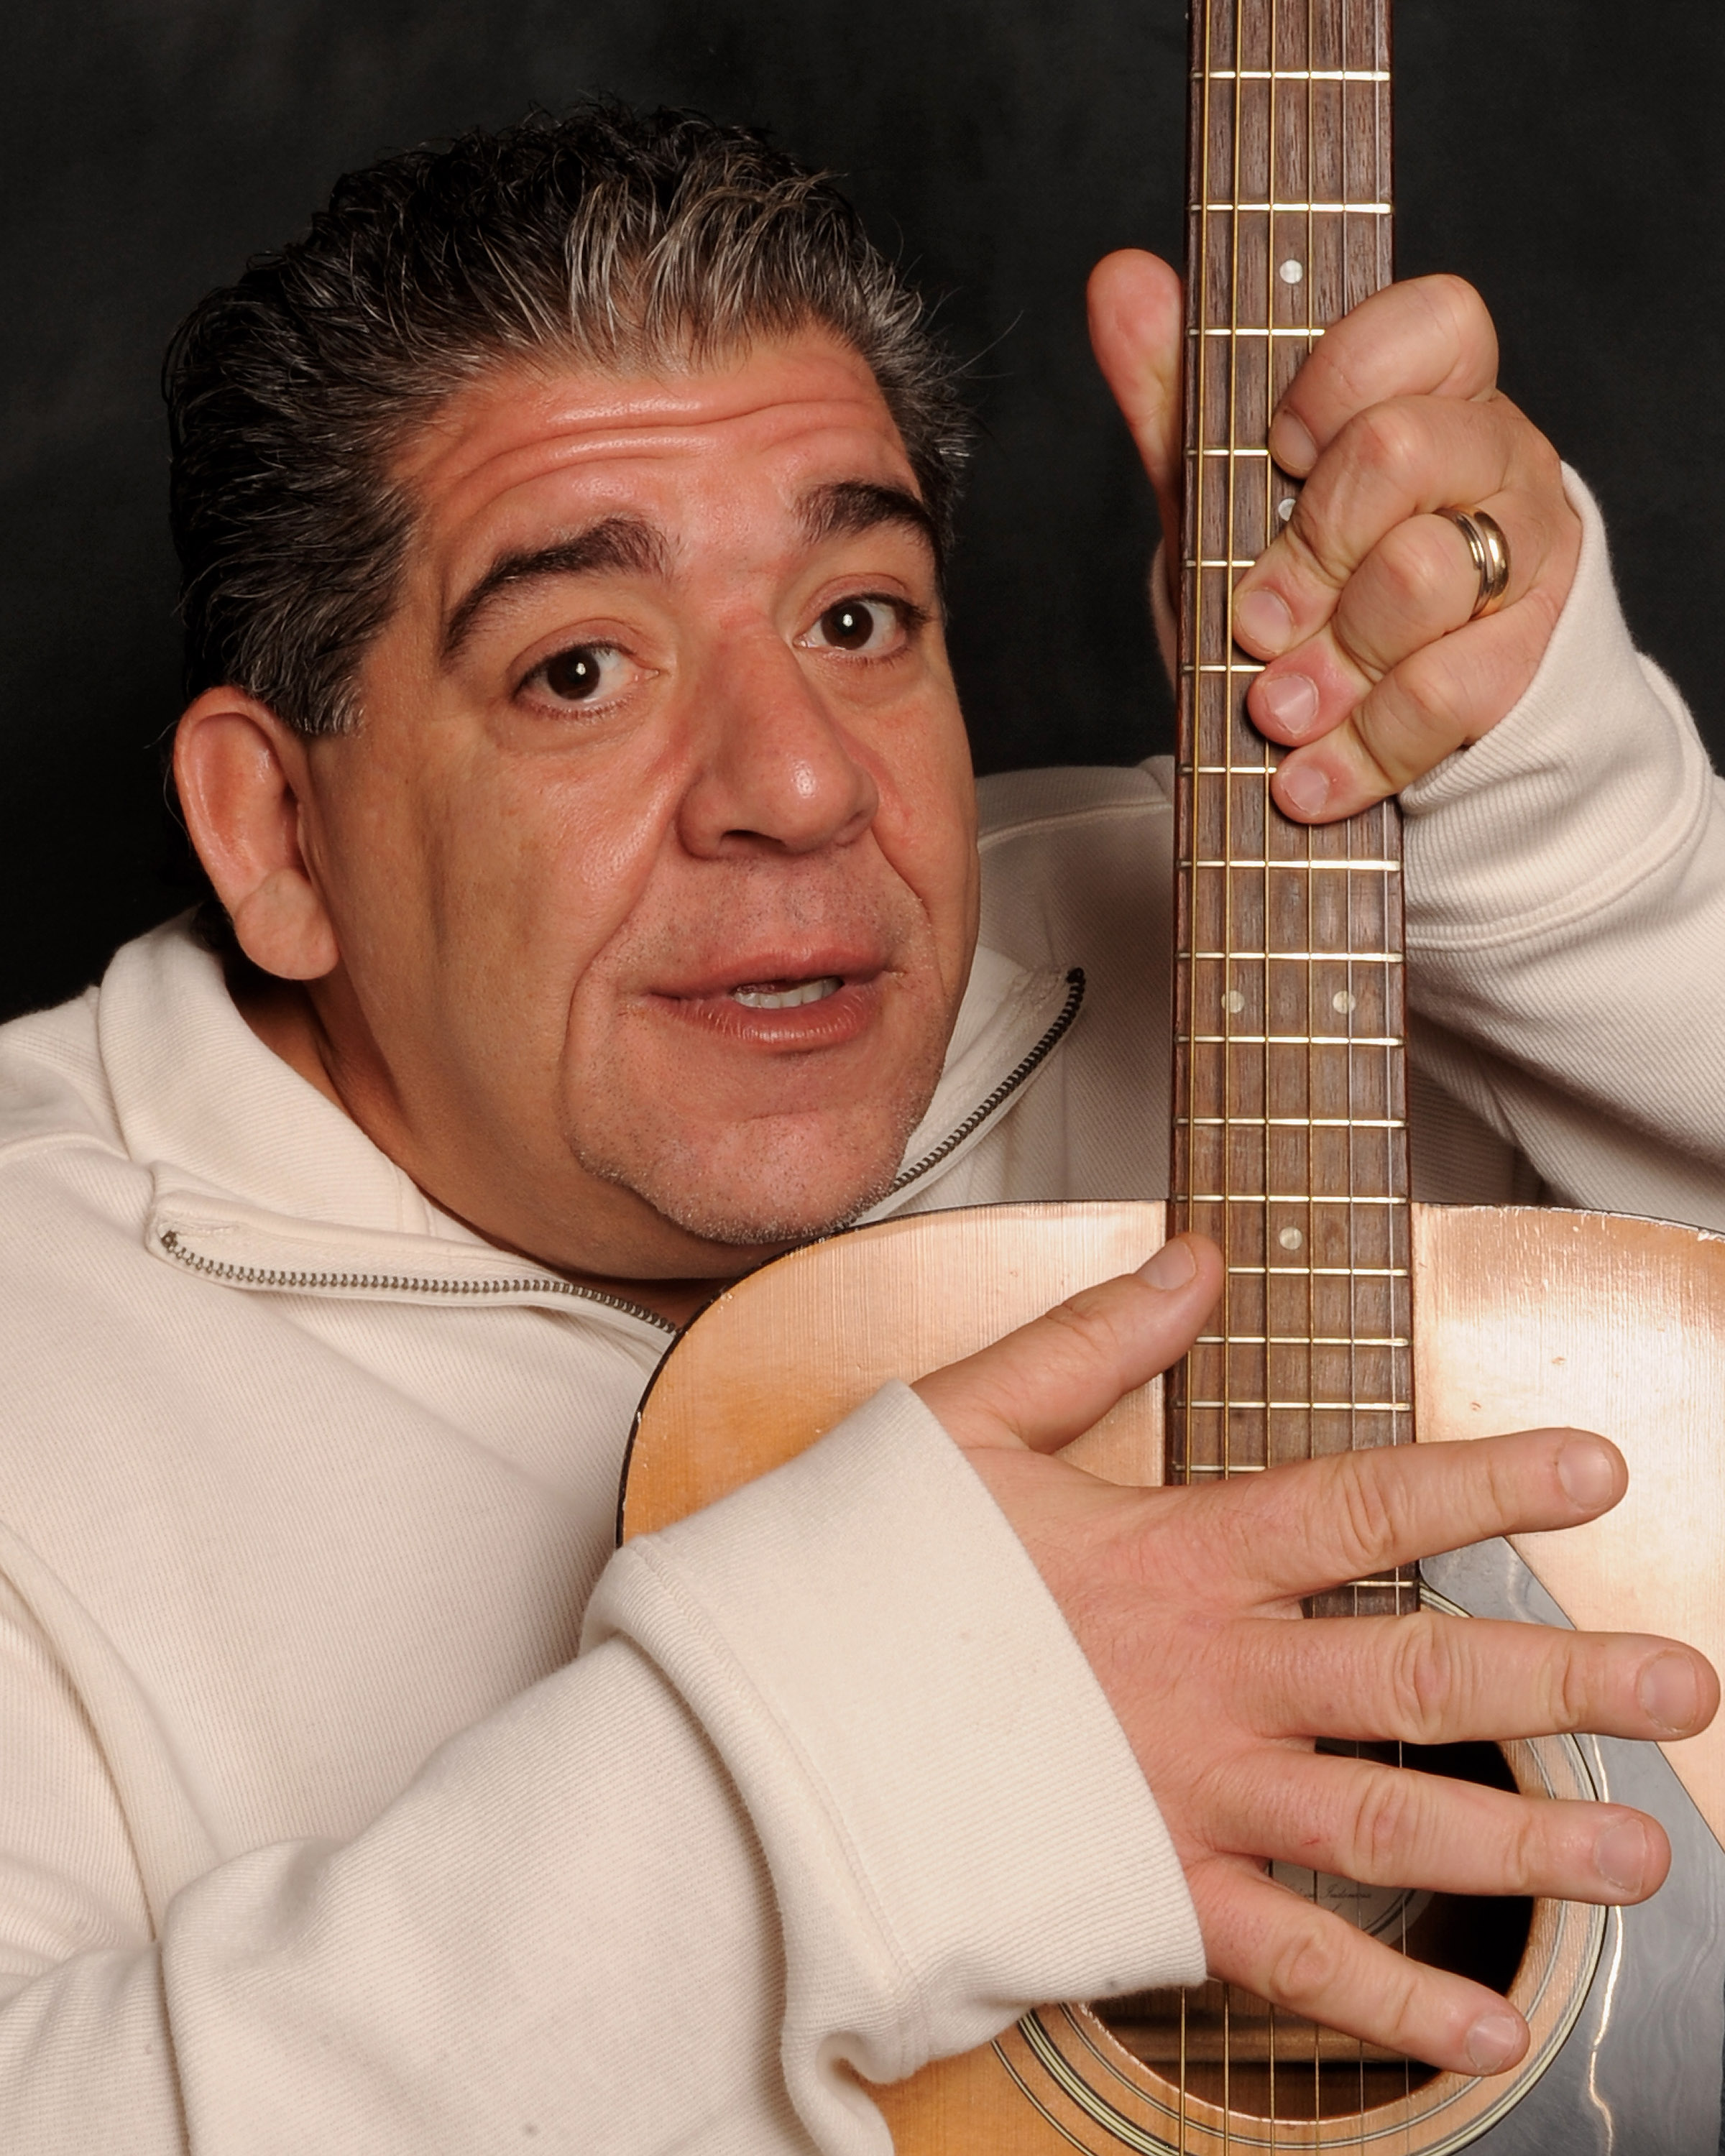 Joey Diaz at The Ice House Comedy Club on January 30, 2010, in Pasadena, California. | Source: Getty Images